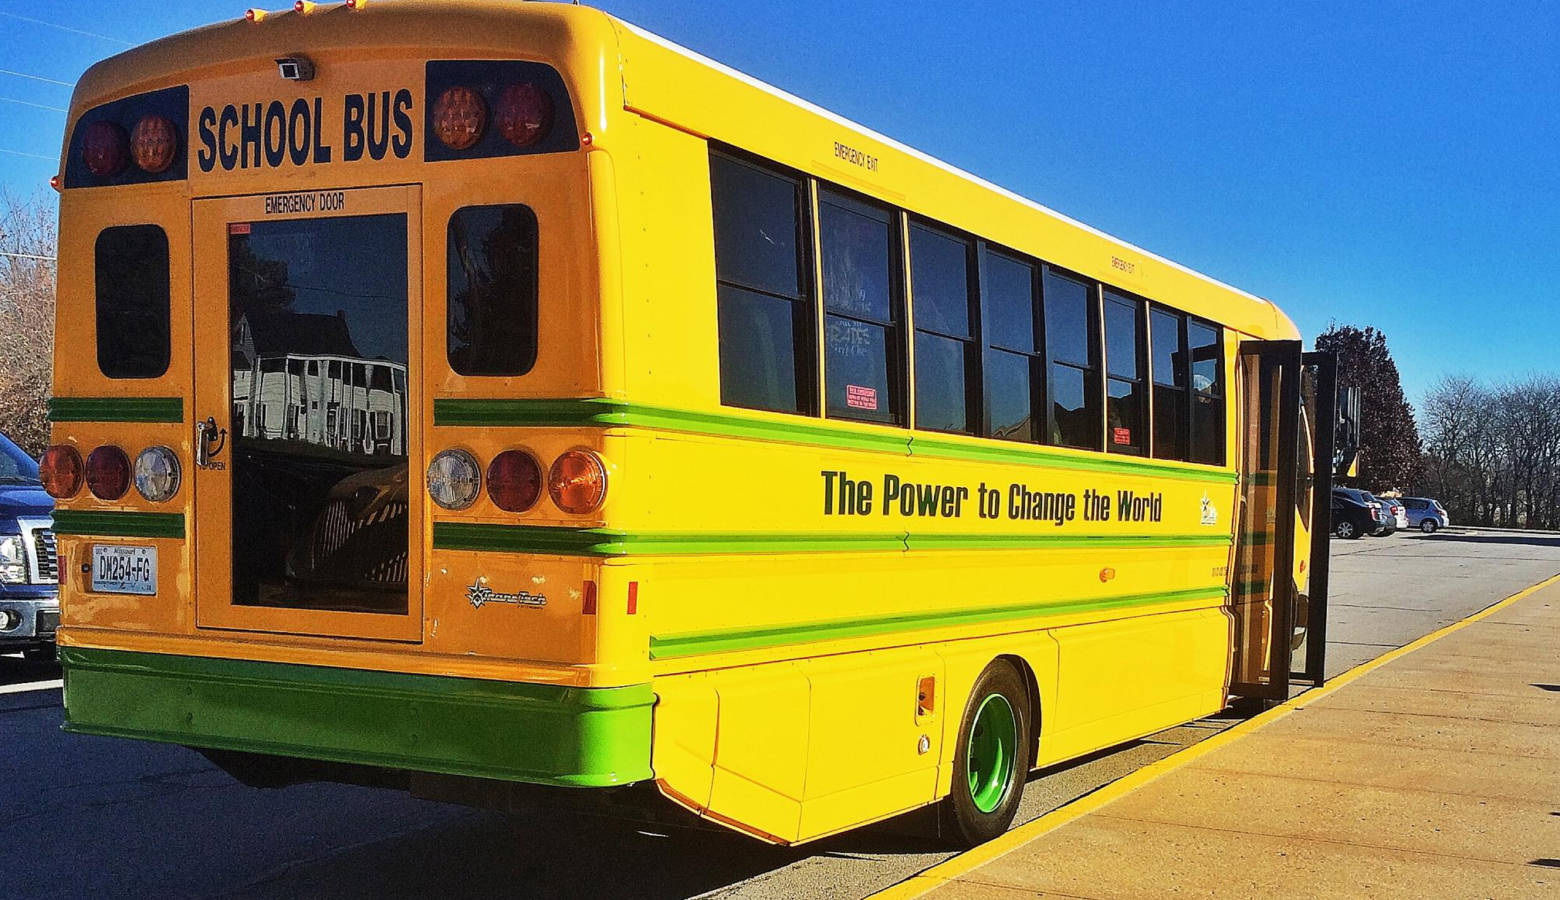 A Smith Electric School bus visits a middle school in Kansas City, Missouri, 2014. (Laura Supalla Gilchrist/Flickr)